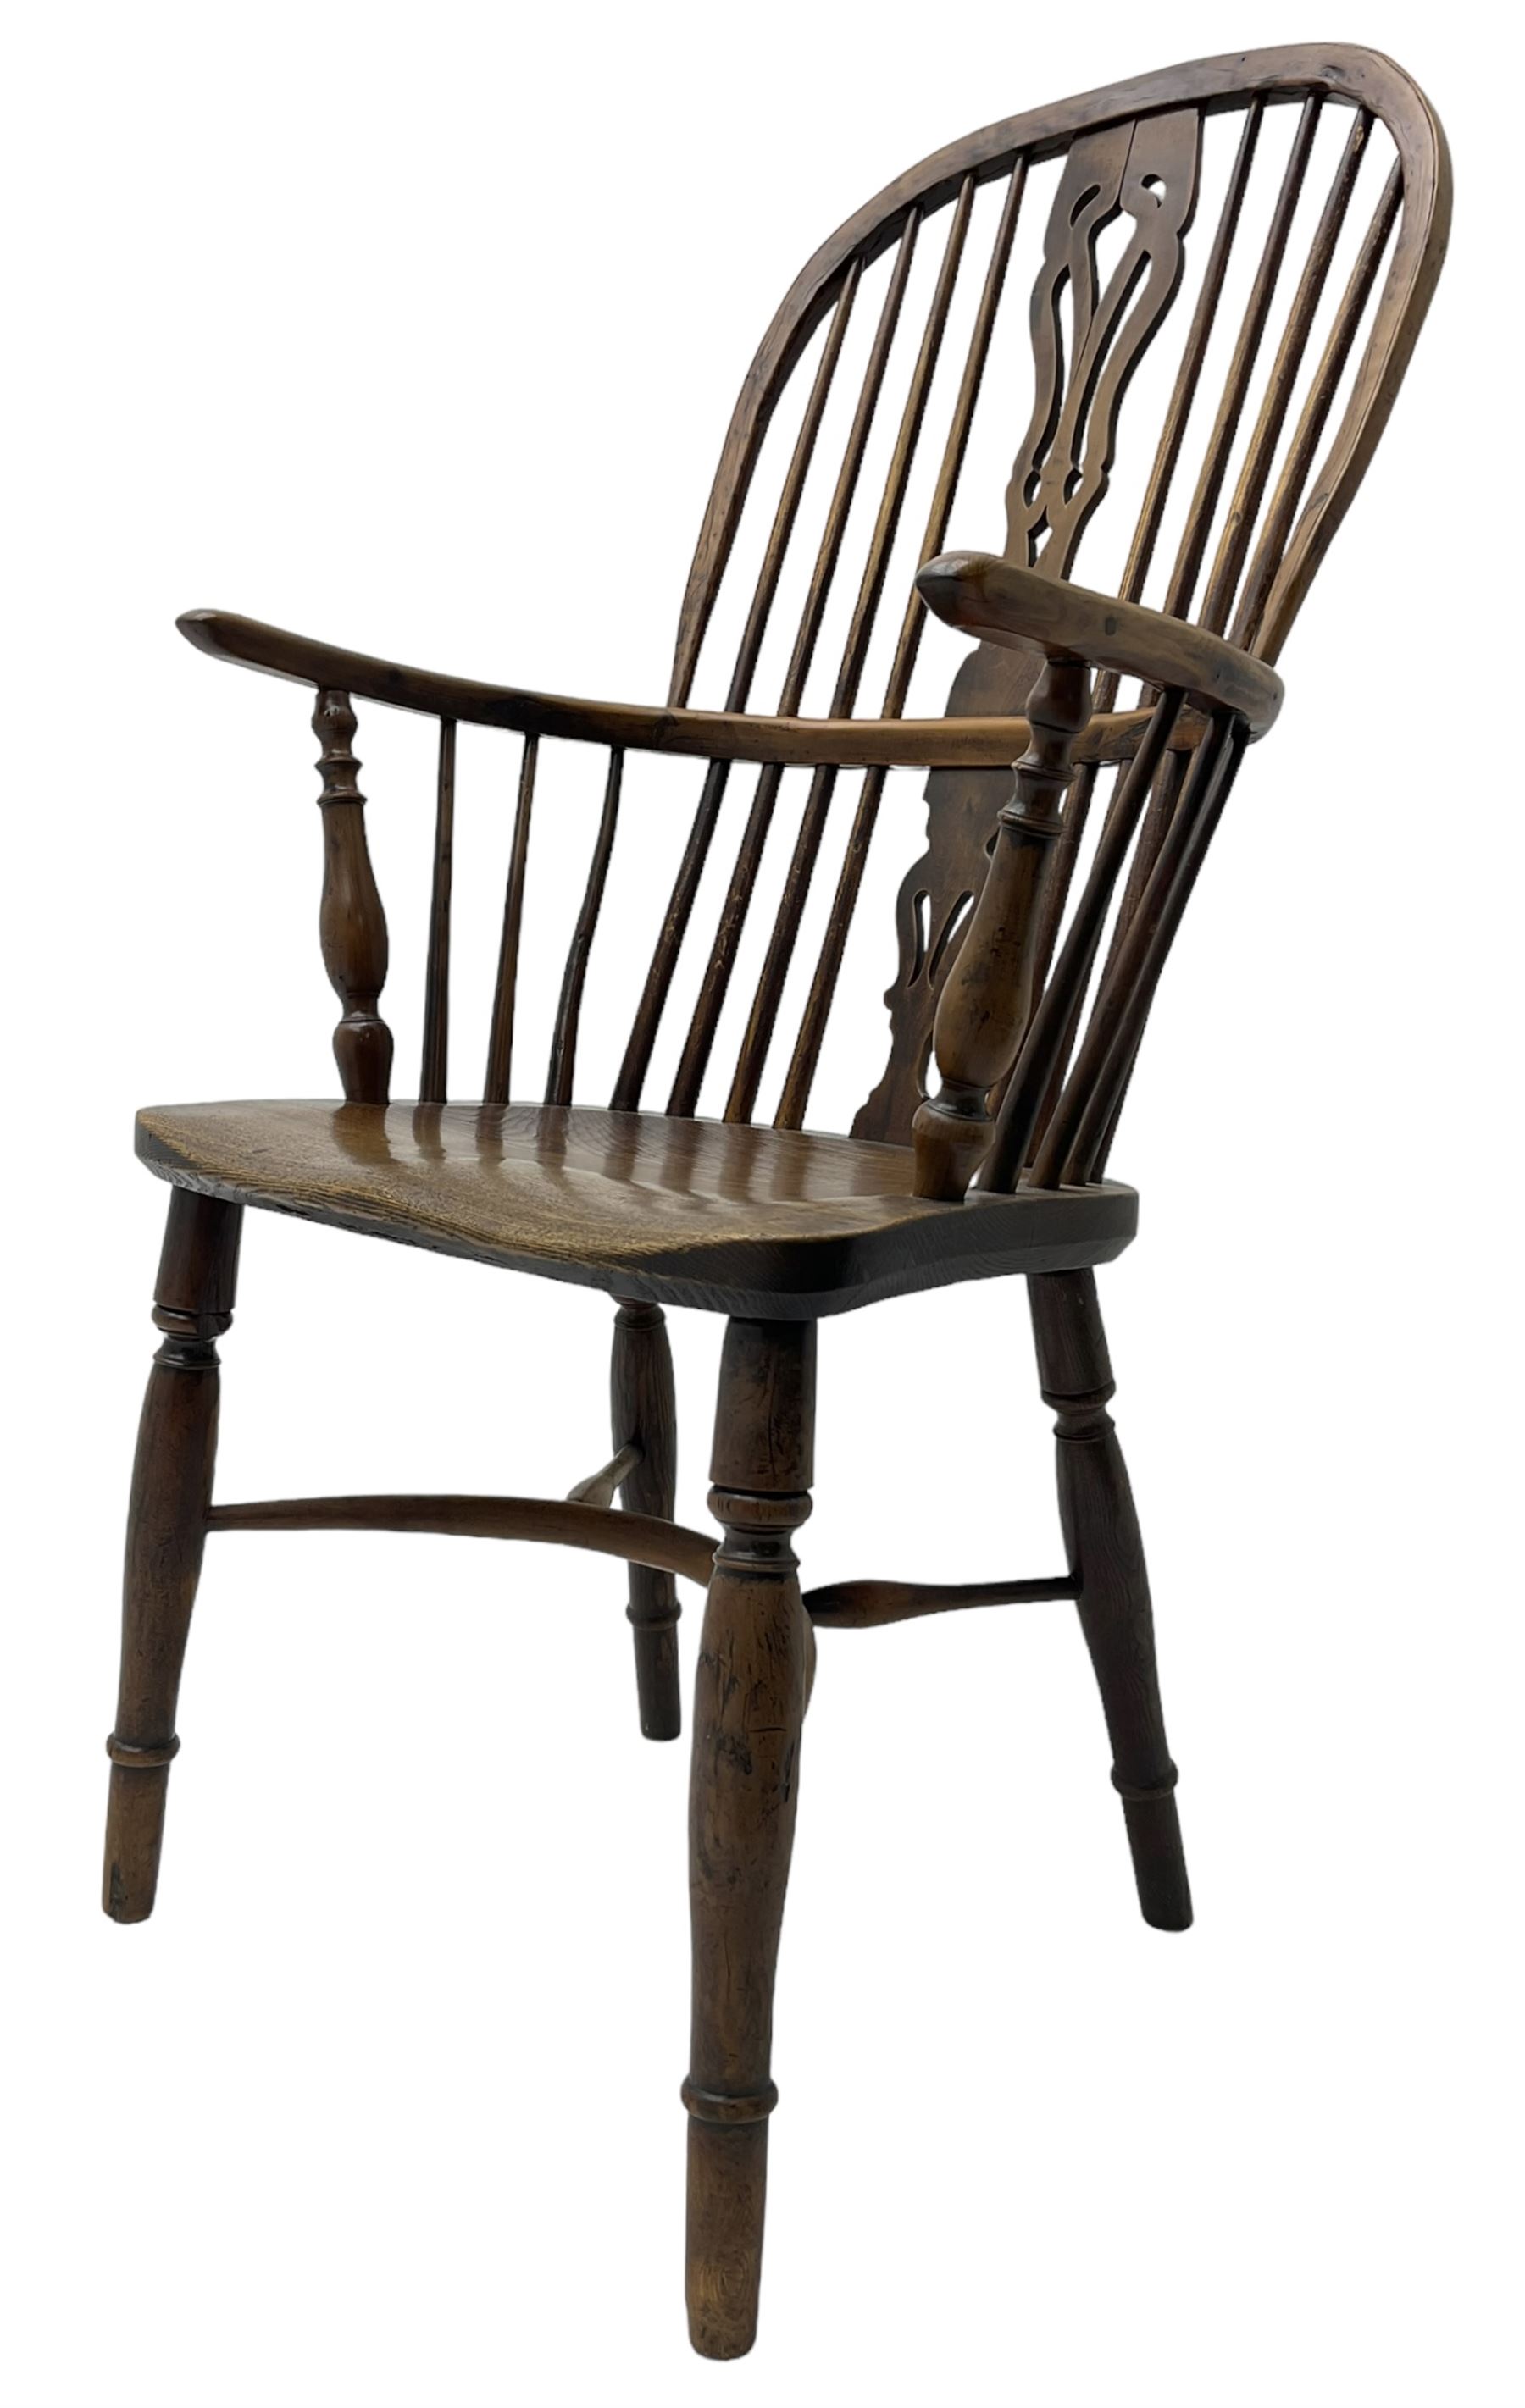 19th century yew wood and elm Windsor chair - Image 6 of 7